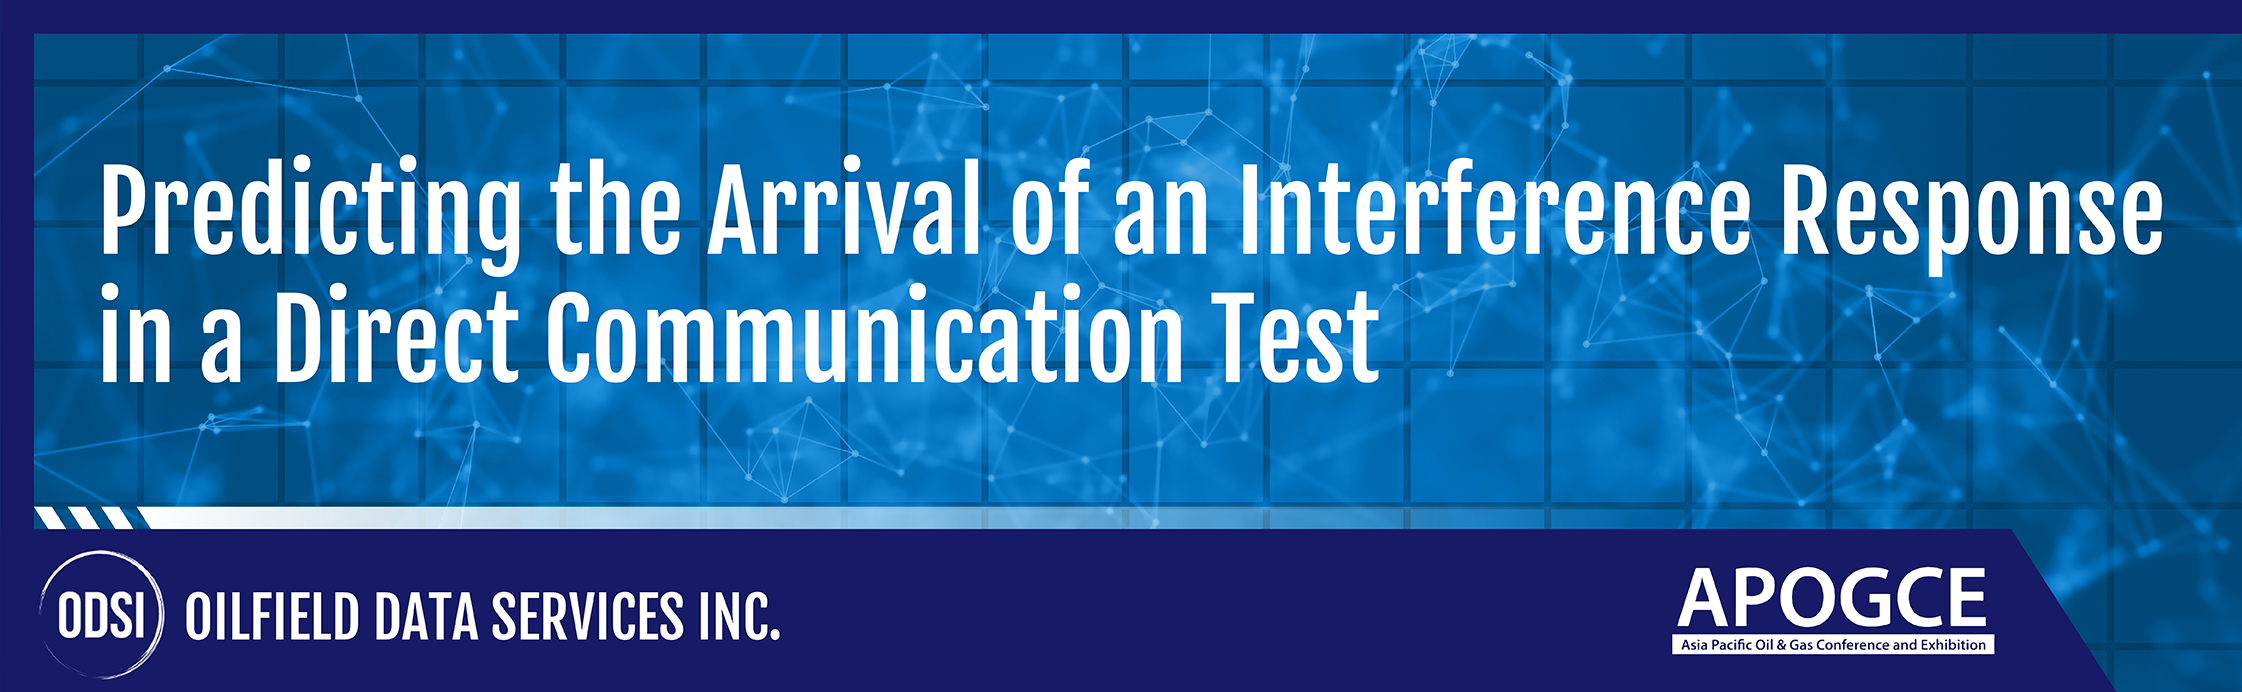 Predicting the Arrival of an Interference response in a direct communication test